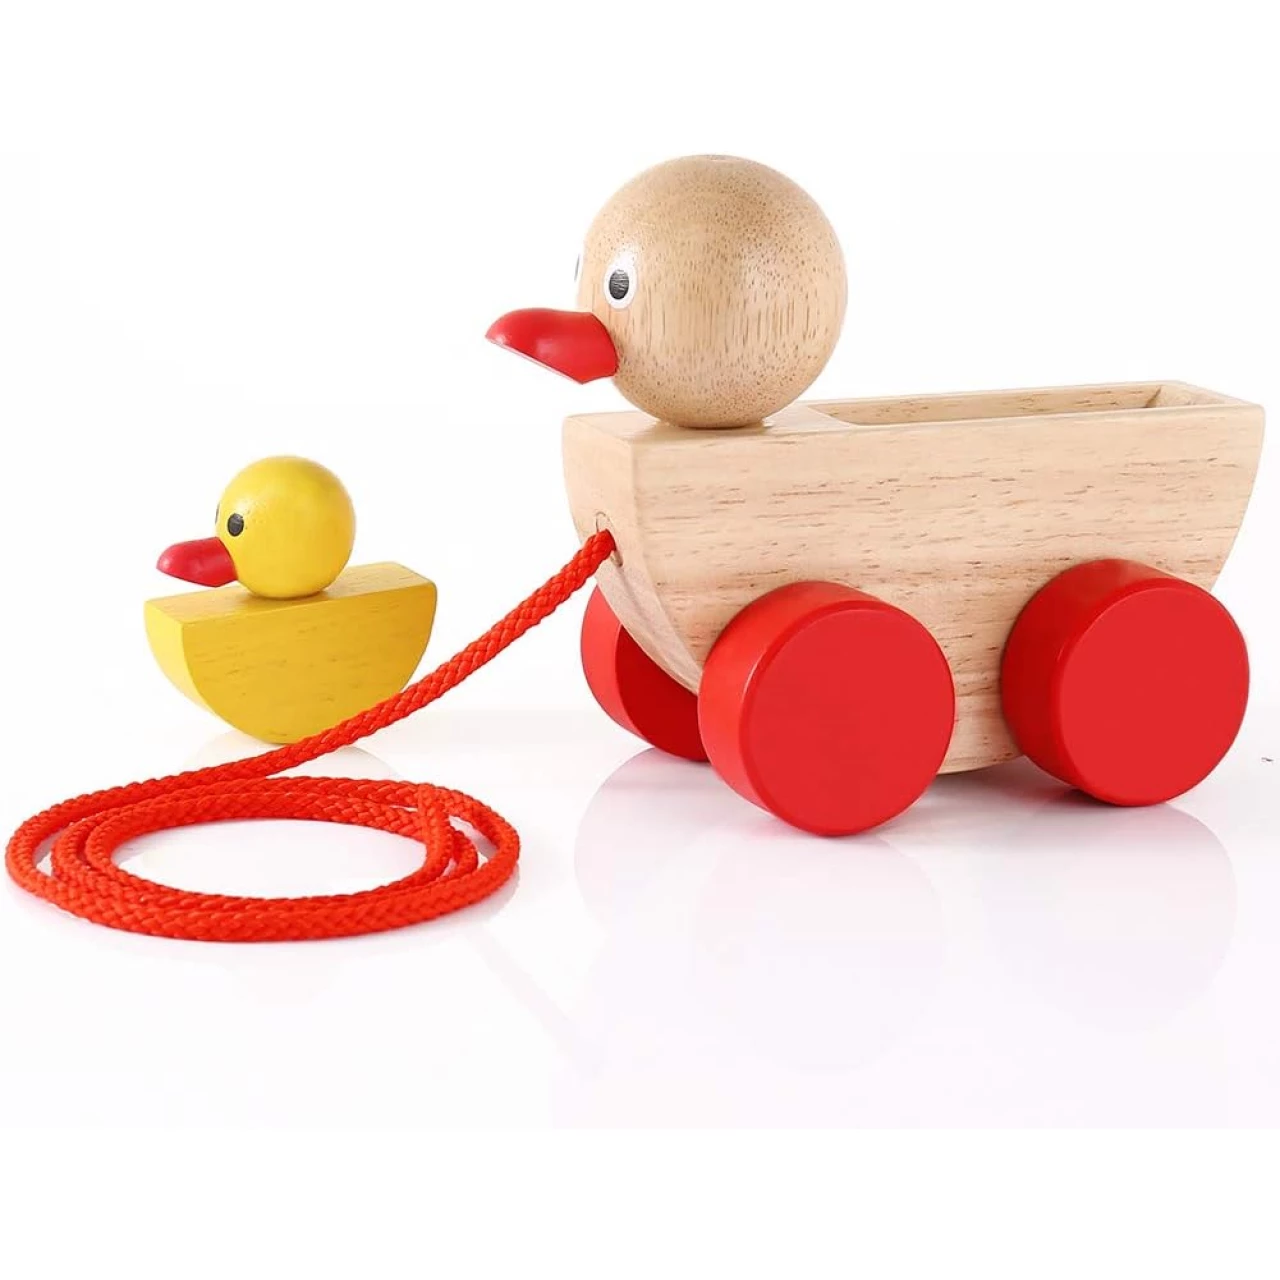 Babe Rock Pull Toy Wooden Duck Pull Along Toddler Toy for Girl Boy Age 1 Year Old Baby